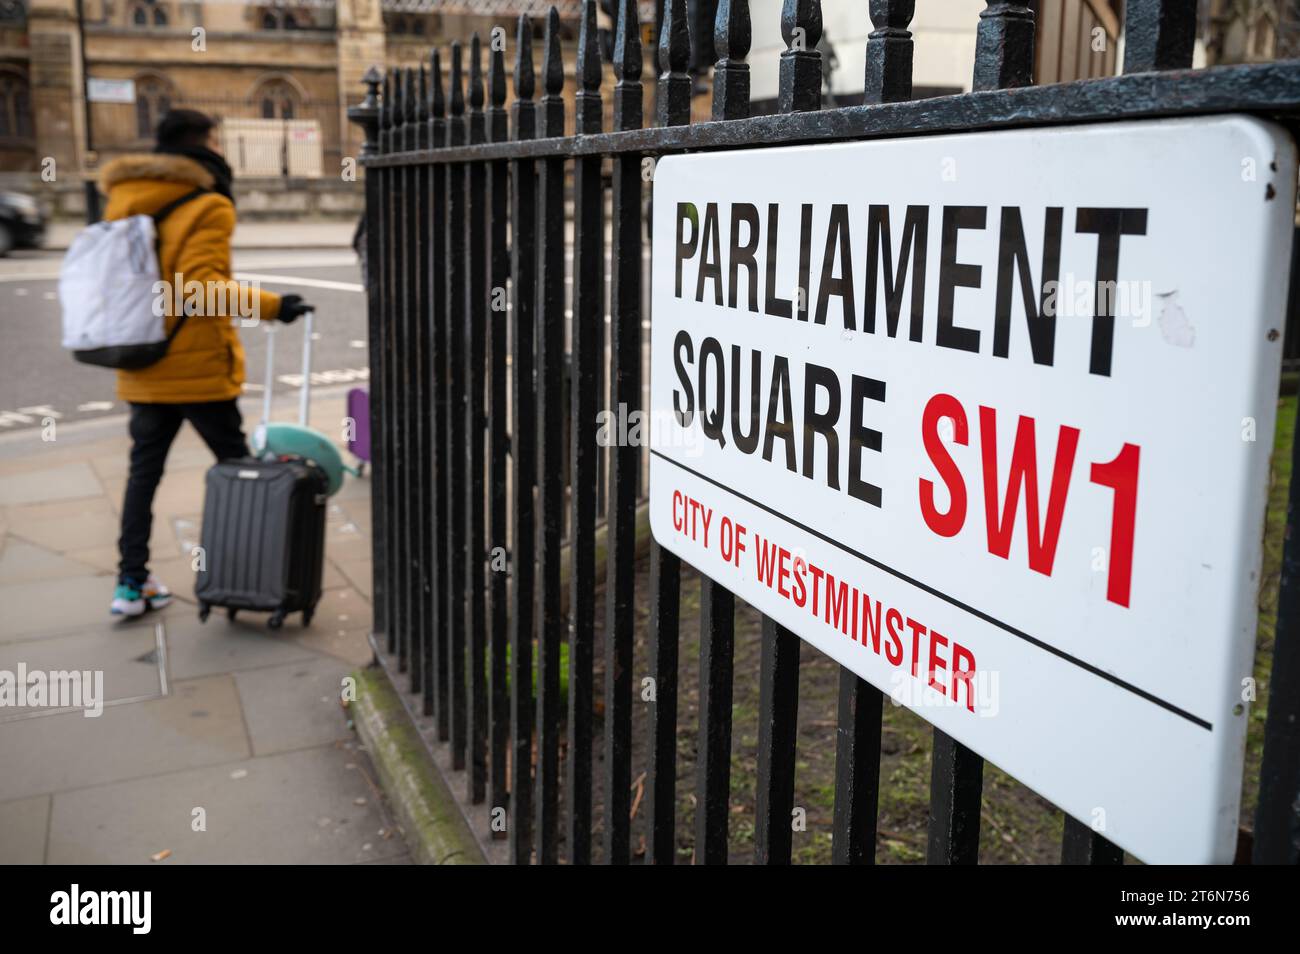 A person wheeling a suitcase passes a street sign for Parliament Square, London, UK Stock Photo